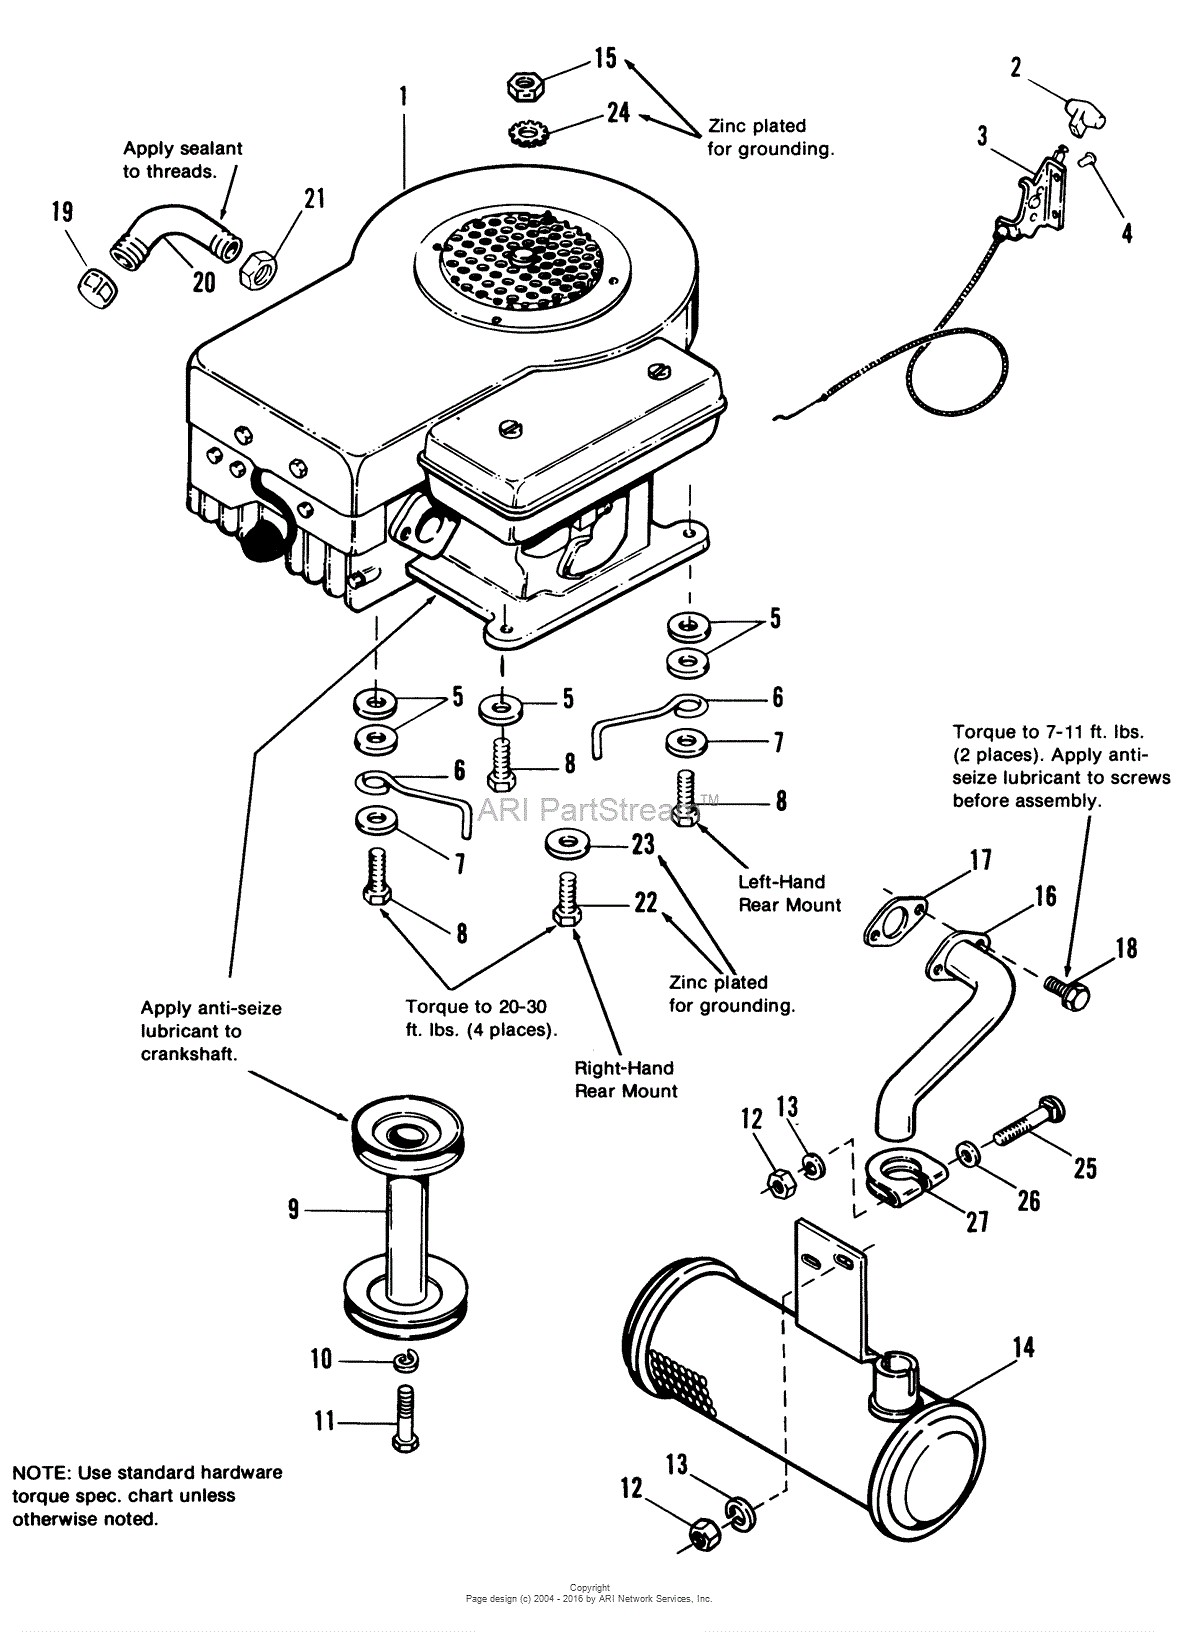 Briggs Stratton Small Engine Parts Diagram Simplicity 4212h 12 5hp B&s Tractor W Agrifab Parts Of Briggs Stratton Small Engine Parts Diagram